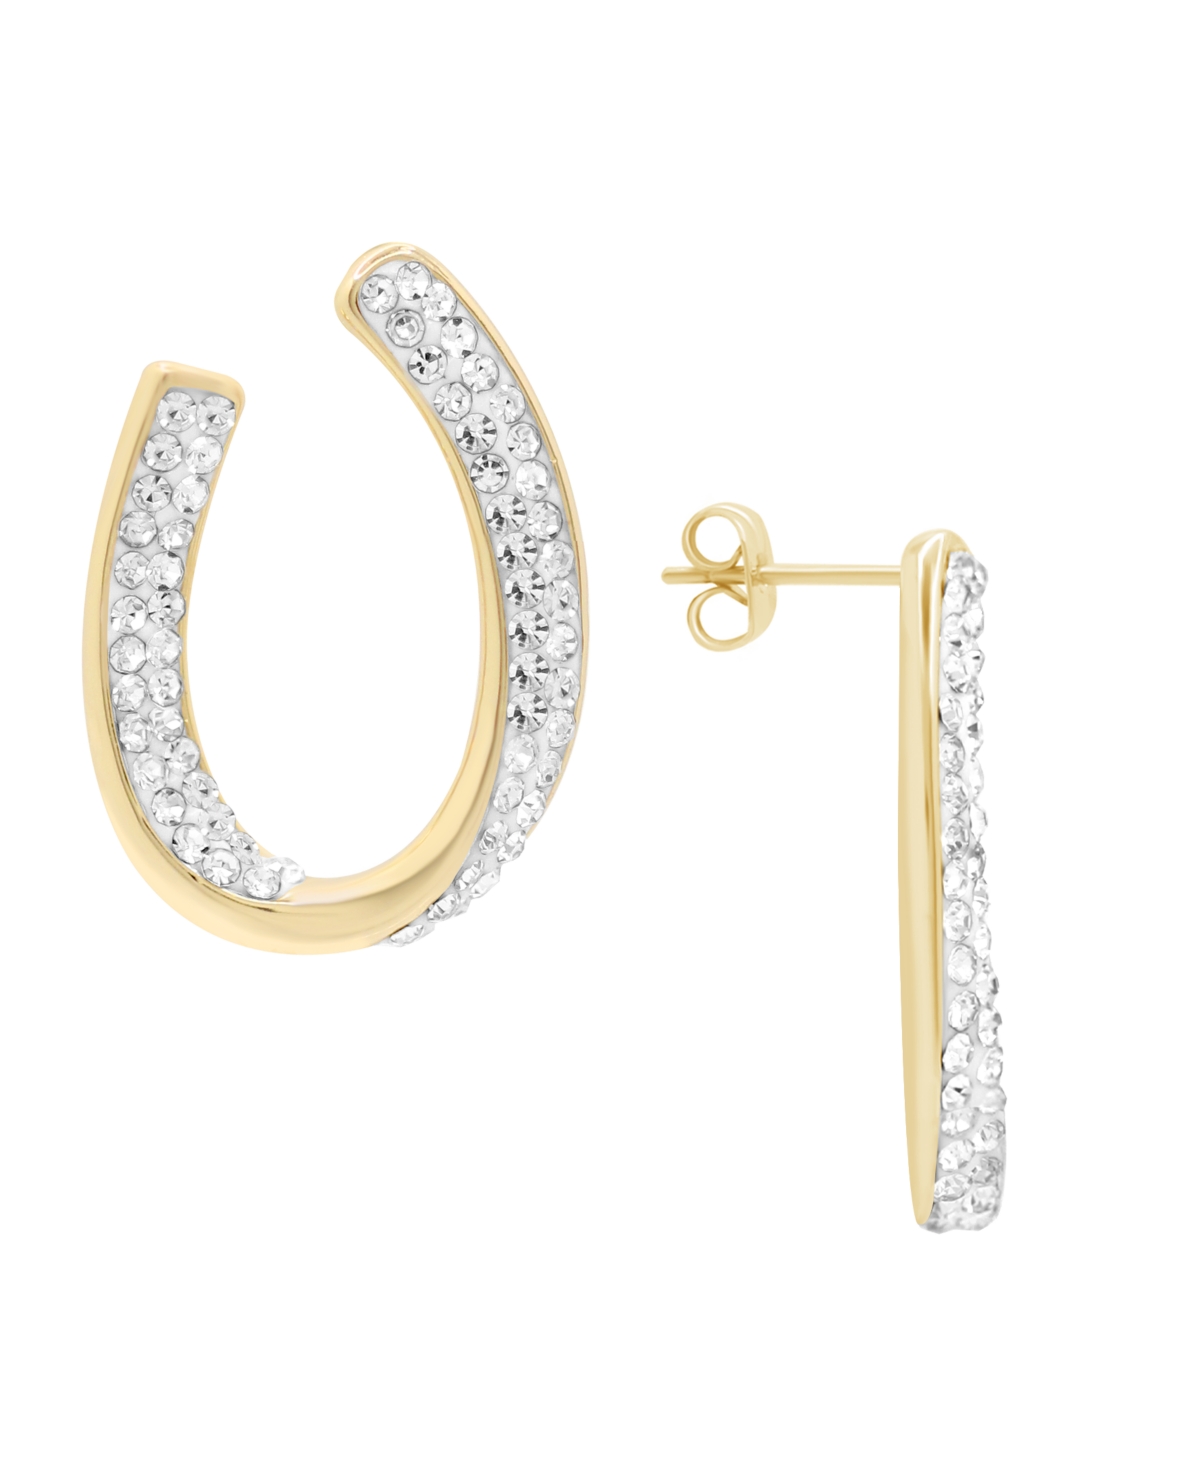 Crystal Curved Post Earring, Gold Plate and Silver Plate - Gold-Tone